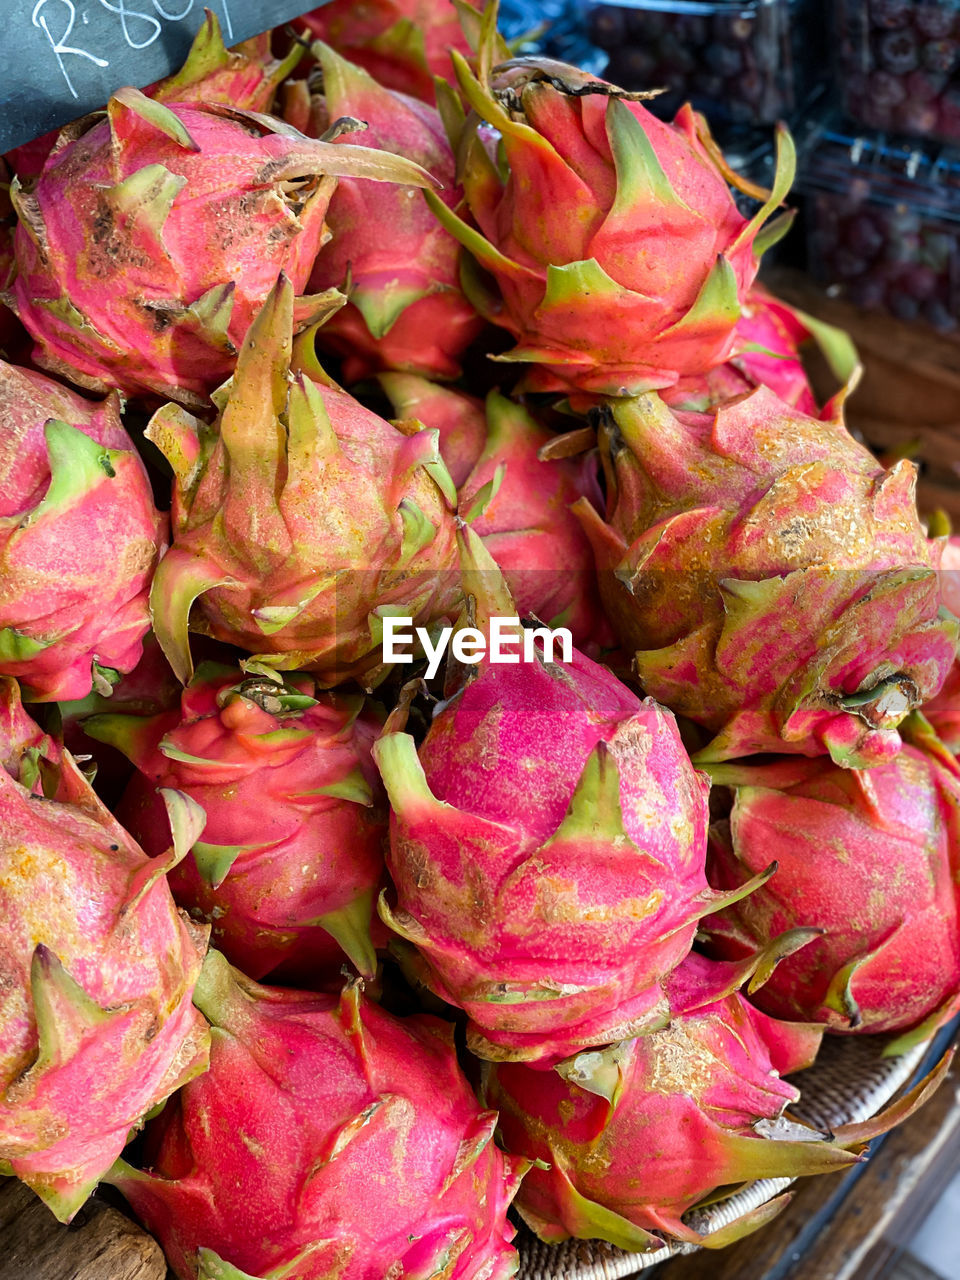 Dragonfruit for sale at farmers market in cape town, south africa